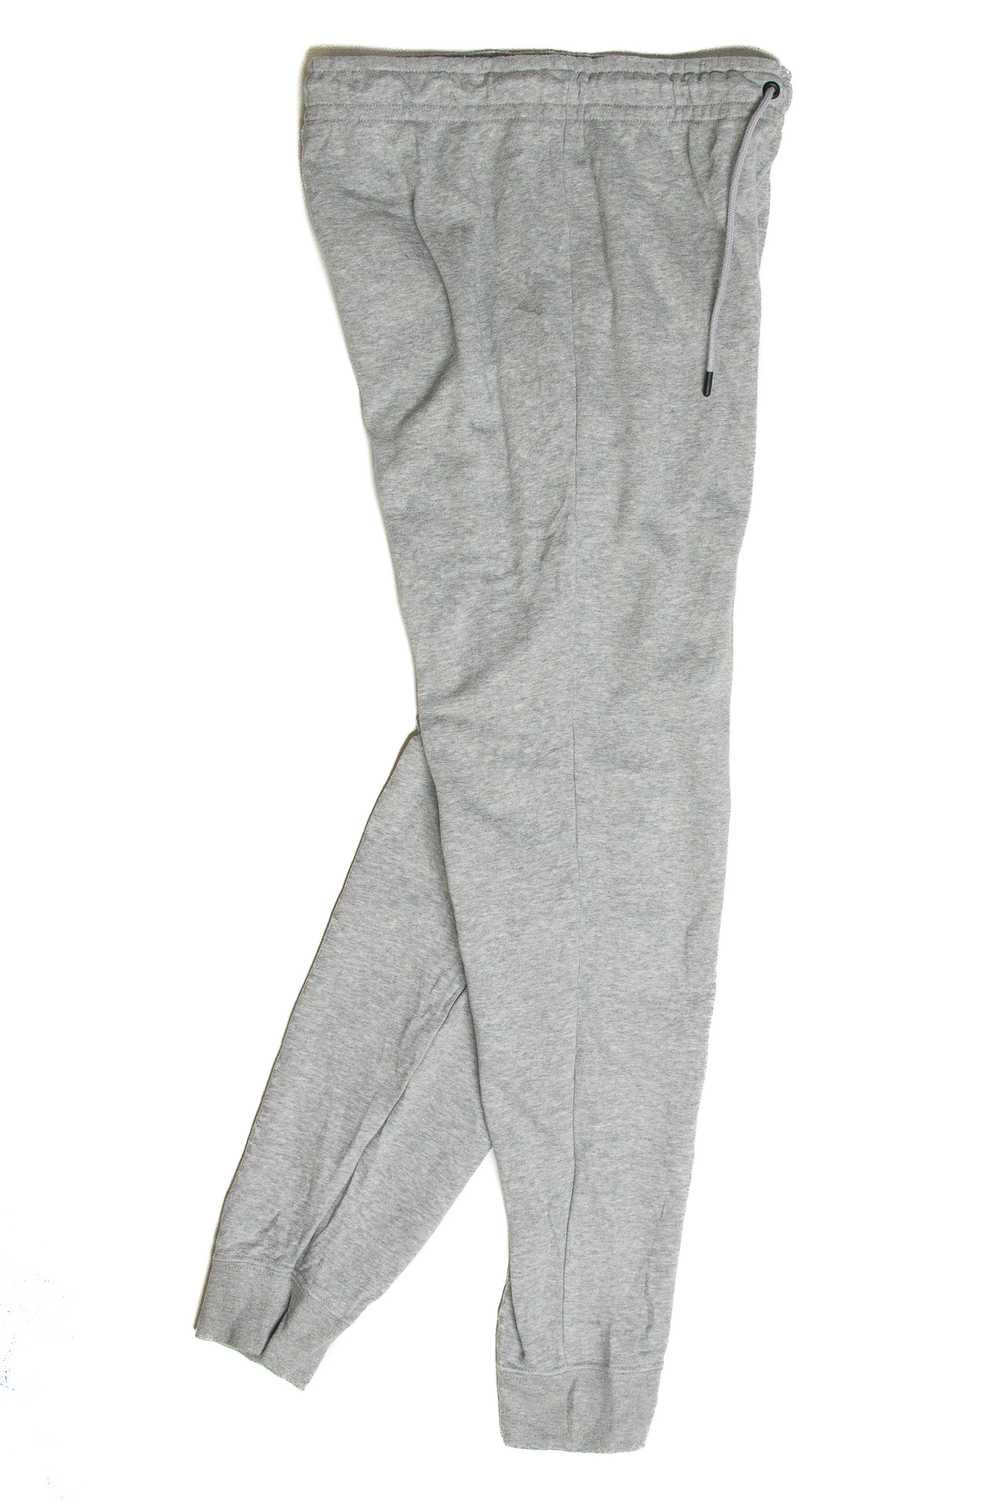 Recycled Nike Track Pants 1313 - image 2